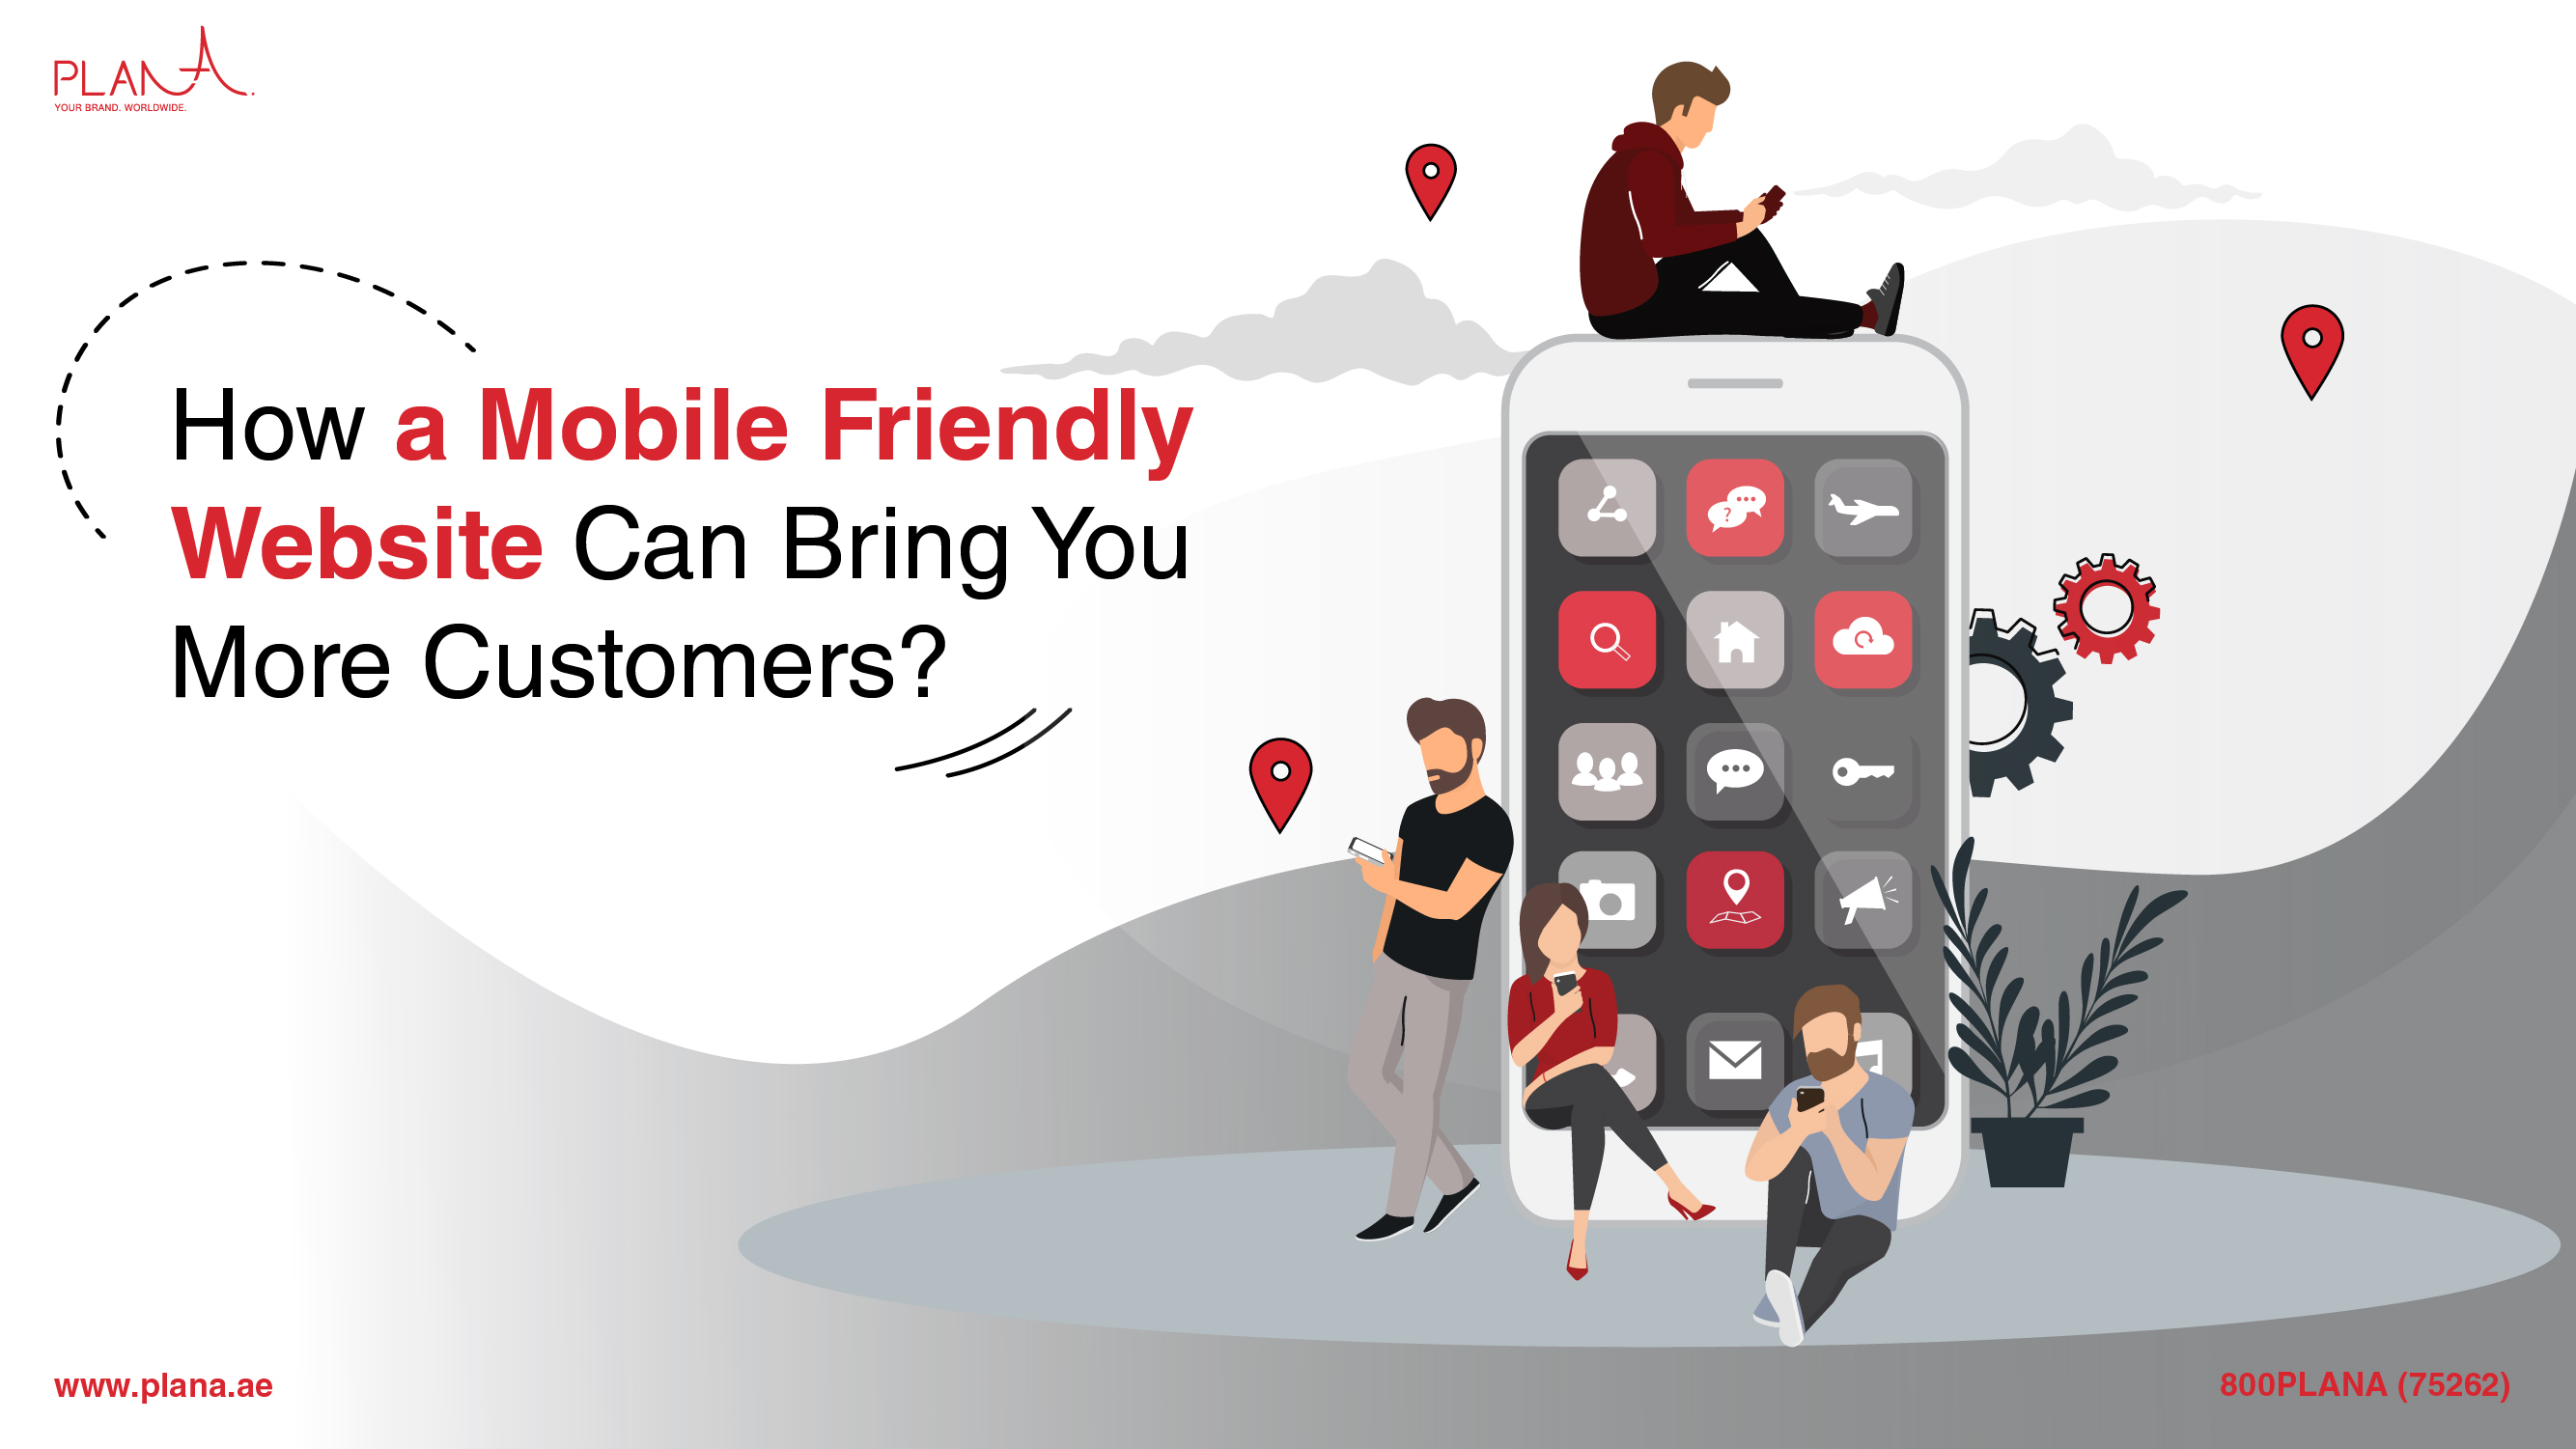 How a Mobile Friendly Website Can Bring You More Customers?